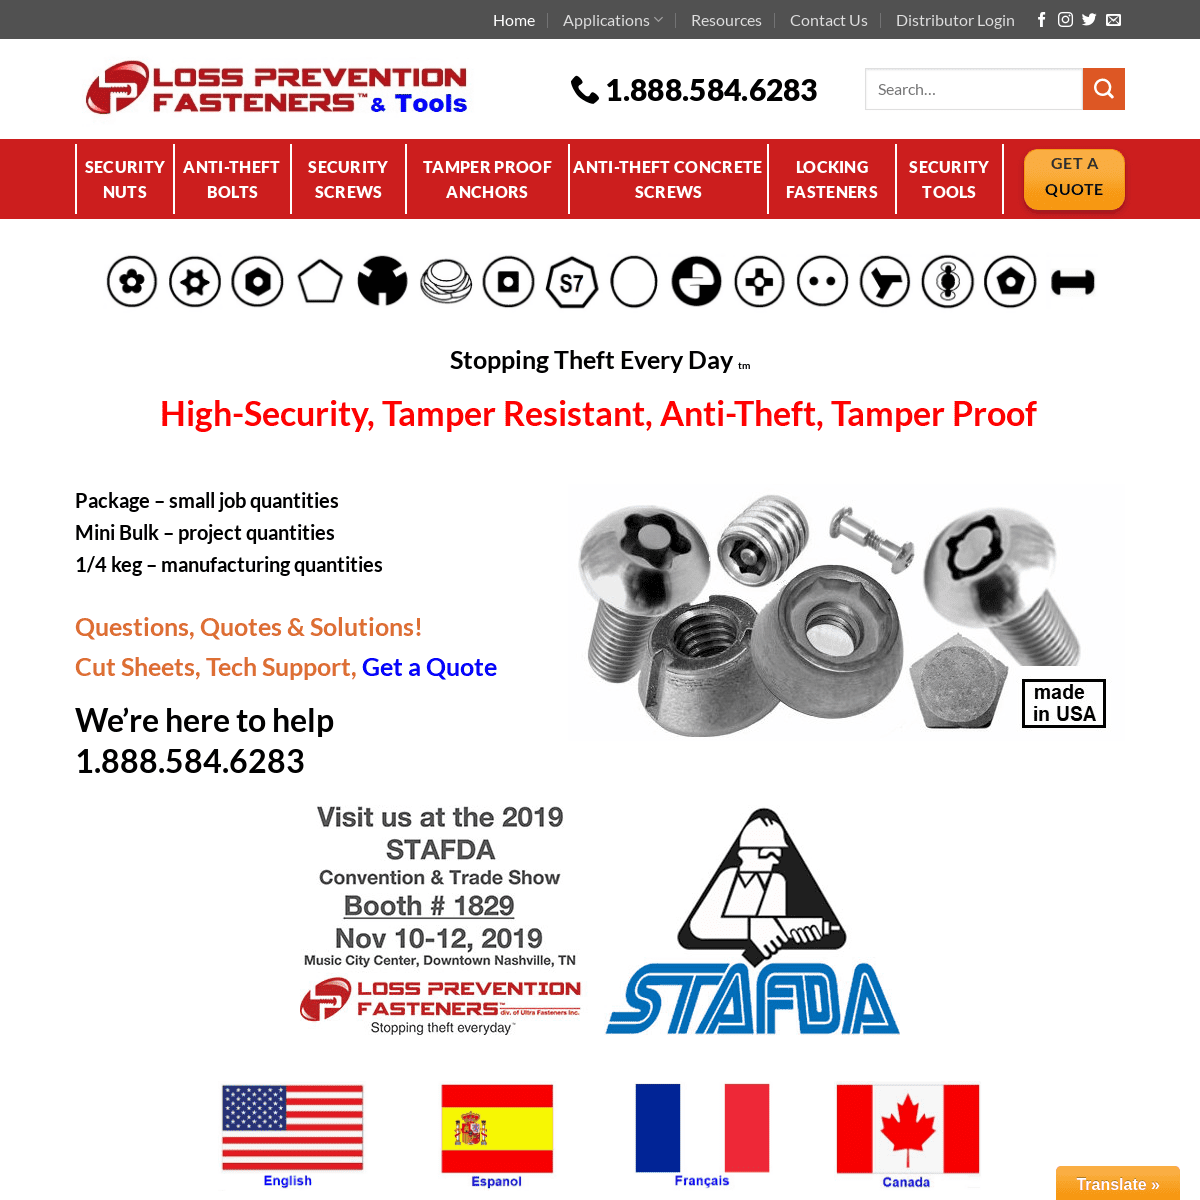 A complete backup of losspreventionfasteners.com